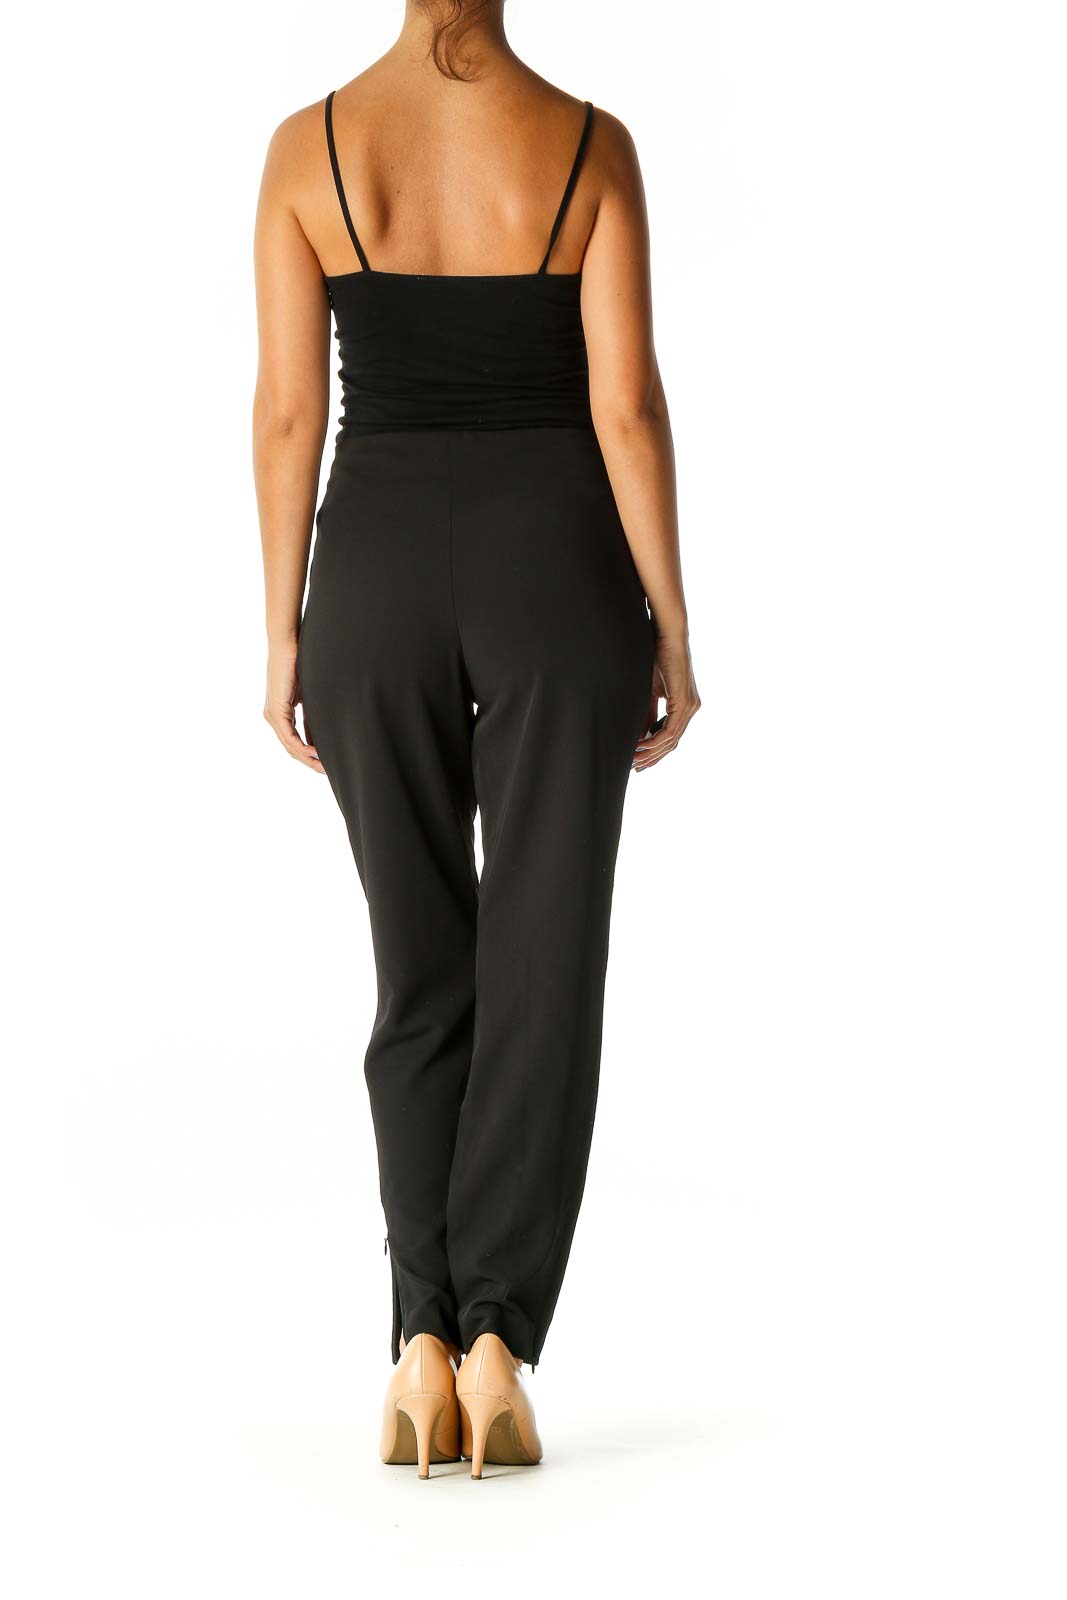 Simply Vera Vera Wang - Black Solid Classic Trousers Polyester Spandex